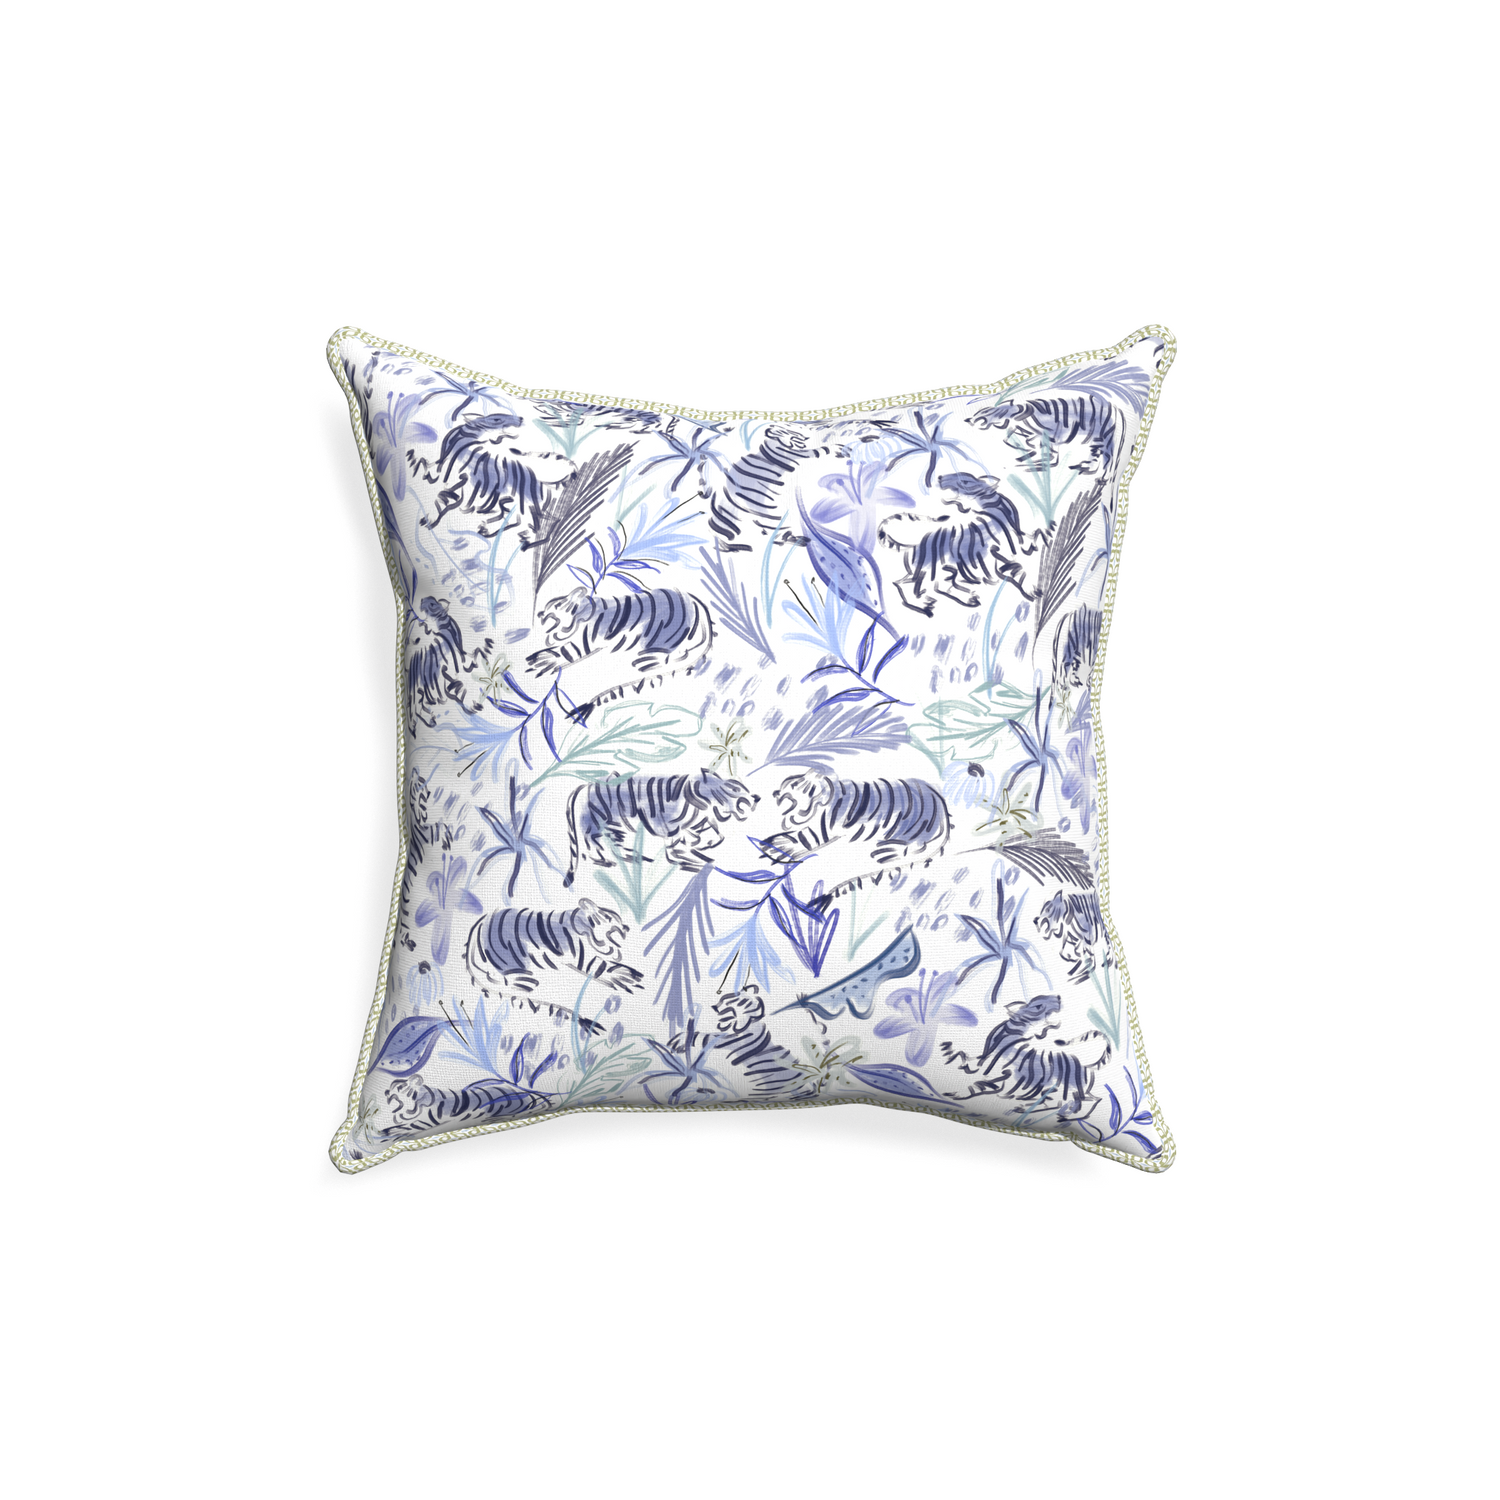 18-square frida blue custom blue with intricate tiger designpillow with l piping on white background